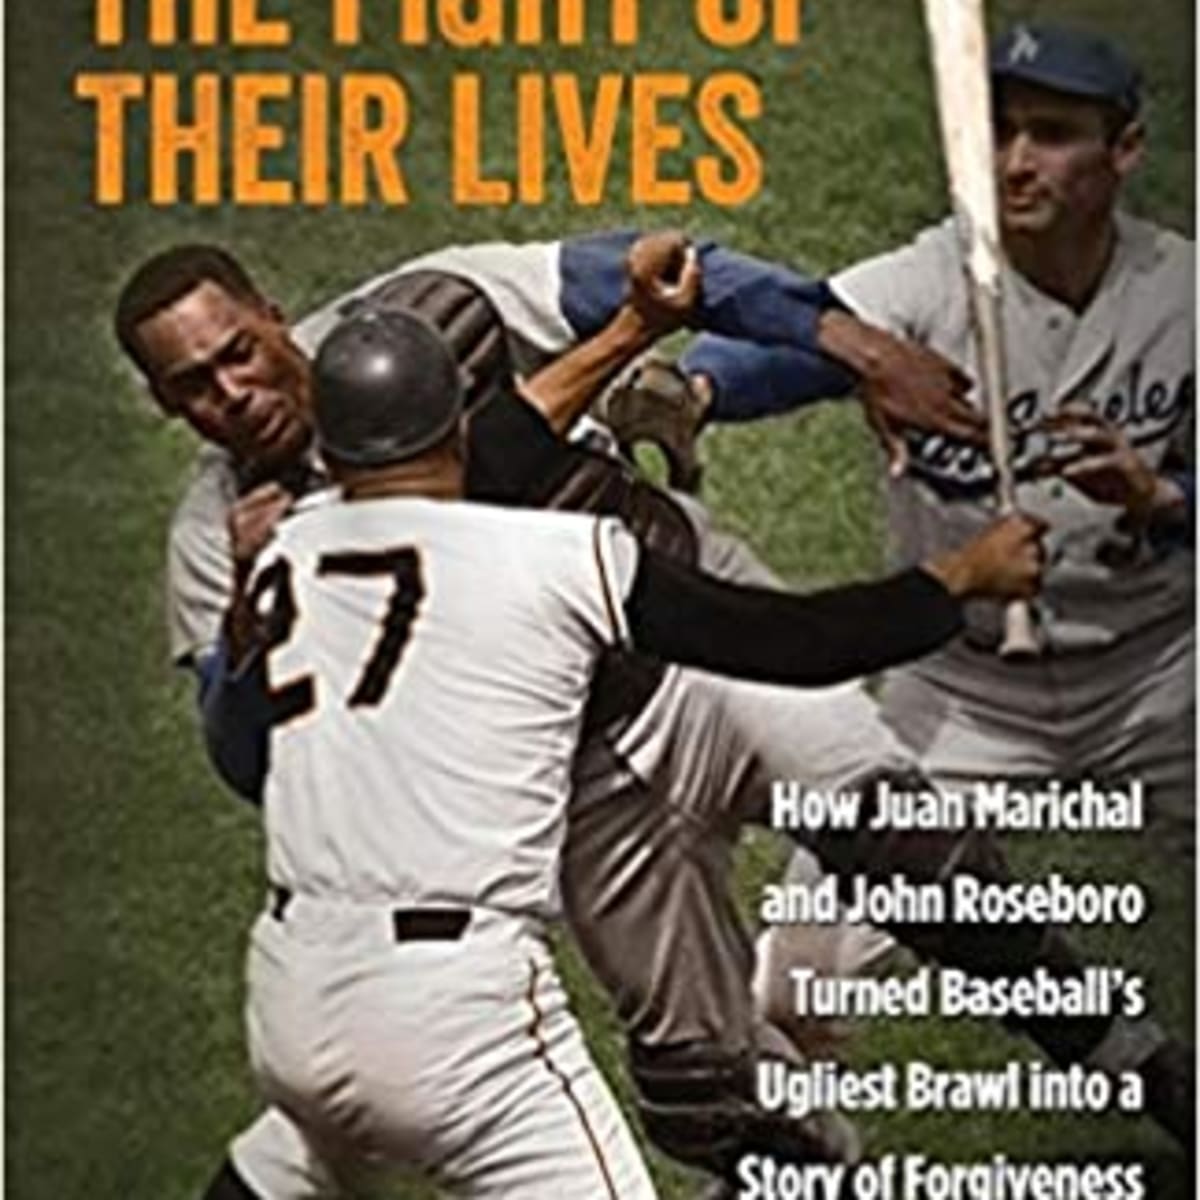 Book Excerpt: The Fight of Their Lives: How Juan Marichal and John Roseboro  Turned Baseball's Ugliest Brawl into a Story of Forgiveness and Redemption  - Inside the Dodgers